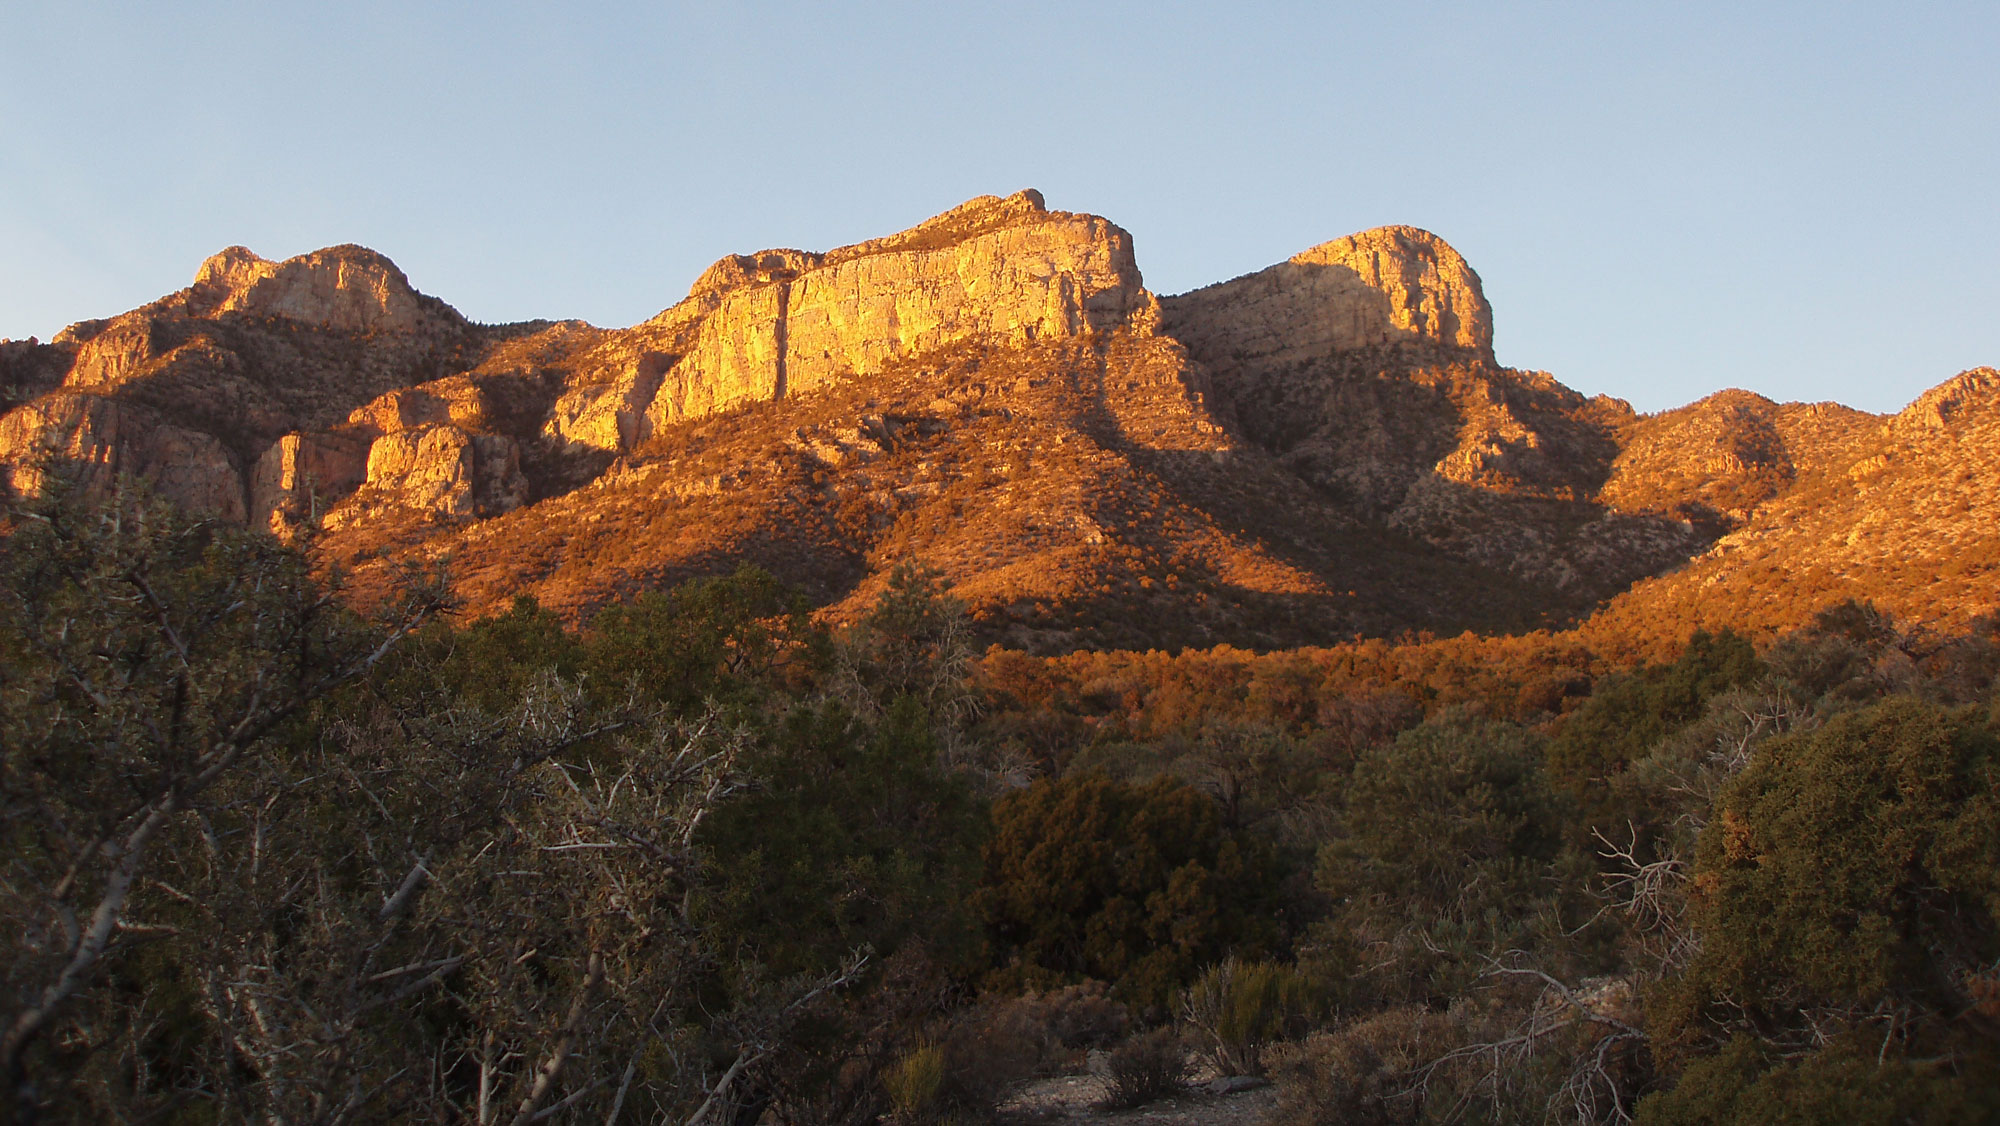 Photograph of the Worthington Mountains in the basin and range of Nevada. The photo shows peaks with a thick cap of rock tilting downward toward the left. The image was taken at sunset.